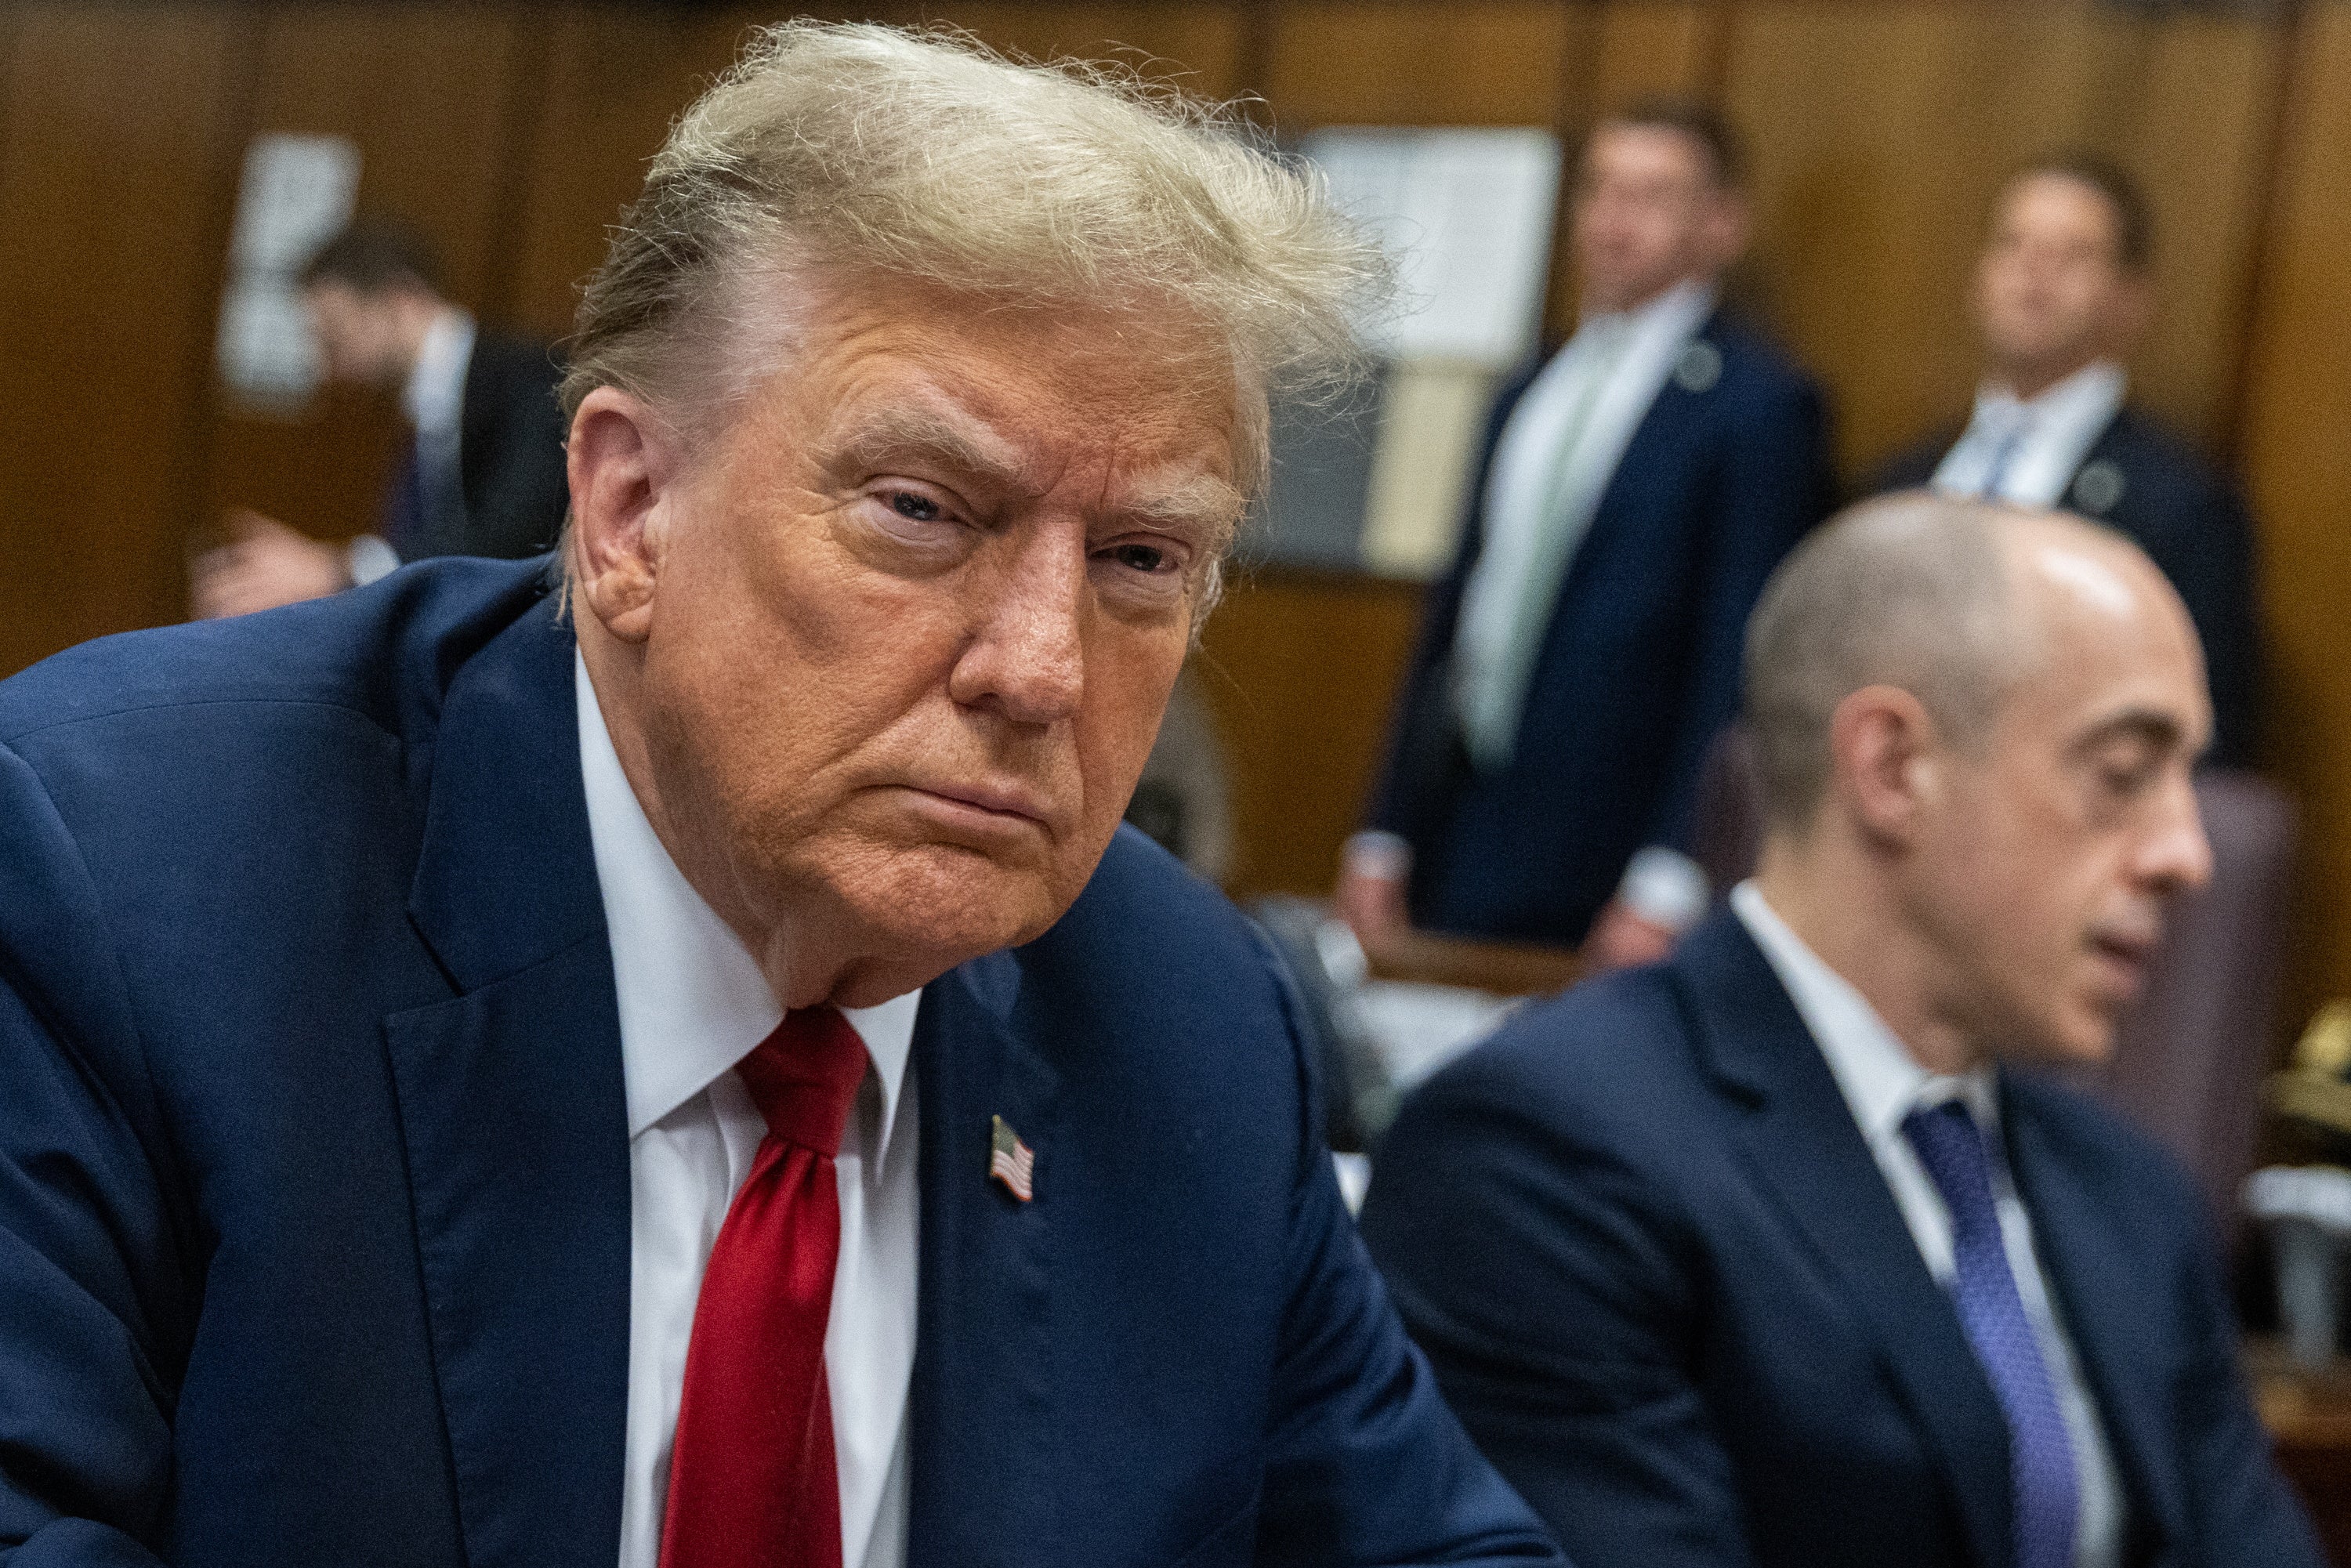 Donald Trump scowls as he sits at the defence table during day one of his first criminal trial in New York on 15 April.